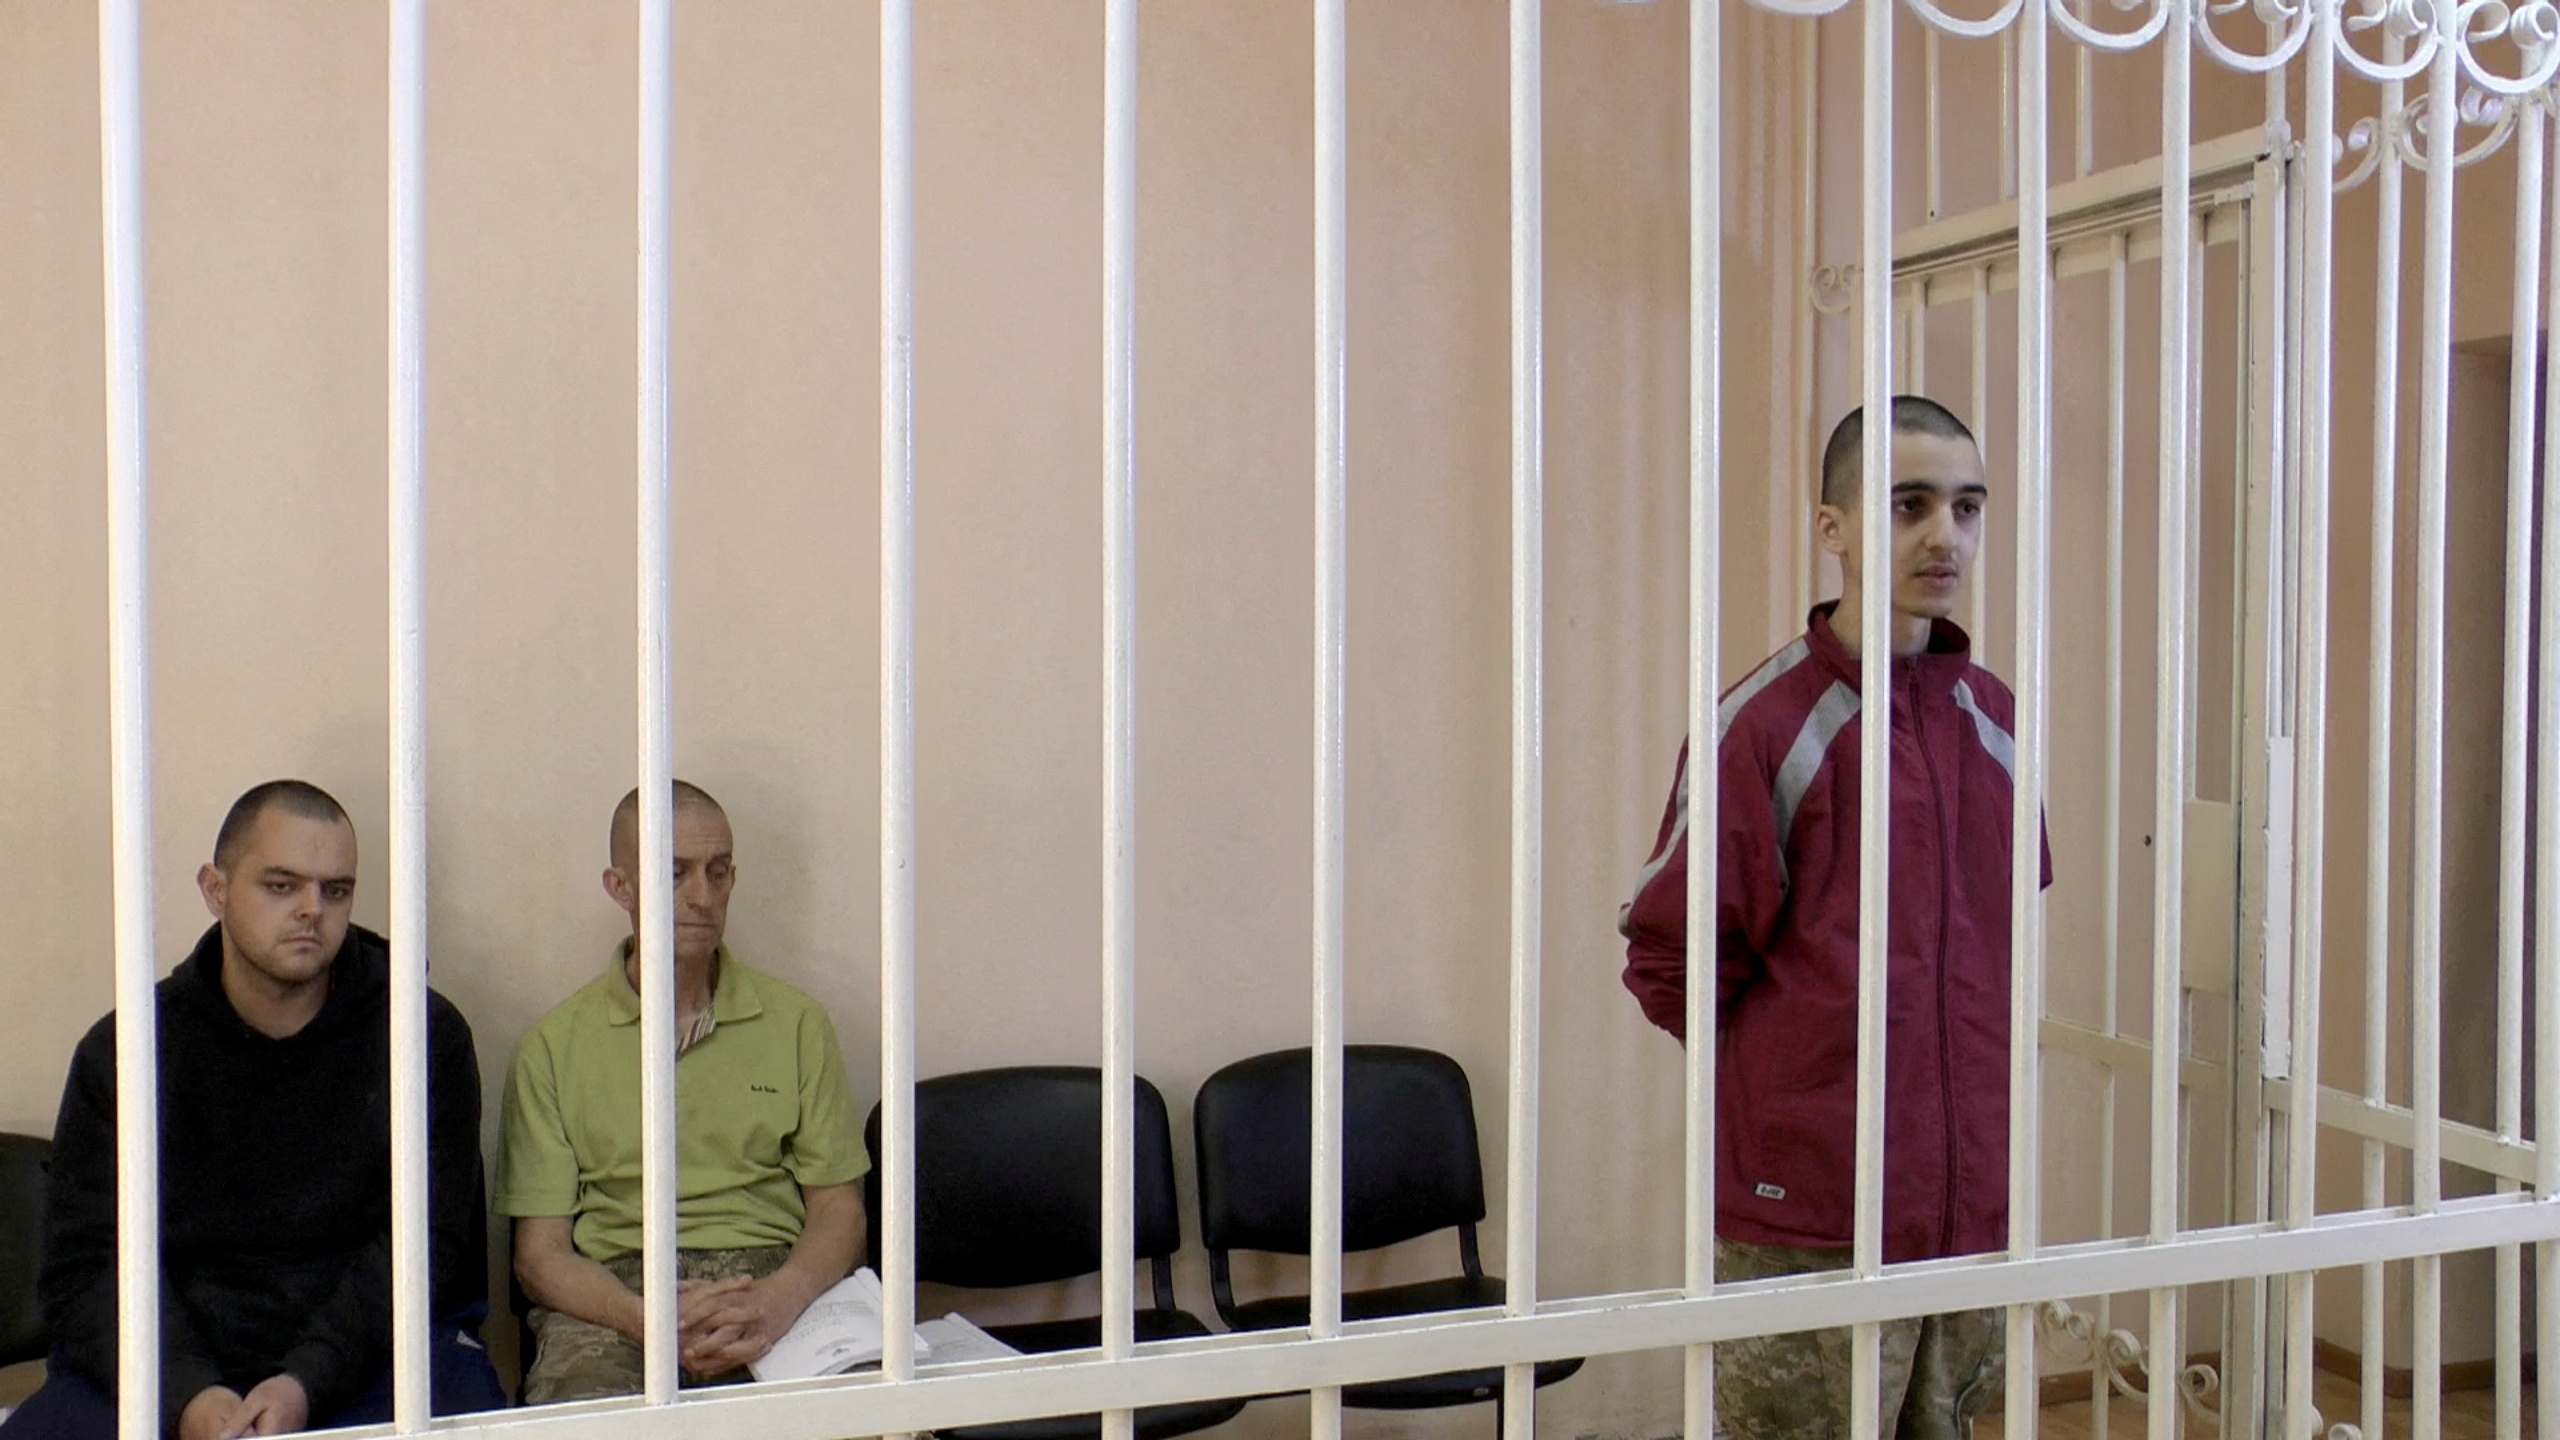 FILE PHOTO: A still image shows Britons Aiden Aslin, Shaun Pinner and Moroccan Brahim Saadoun in a courtroom cage at a location given as Donetsk